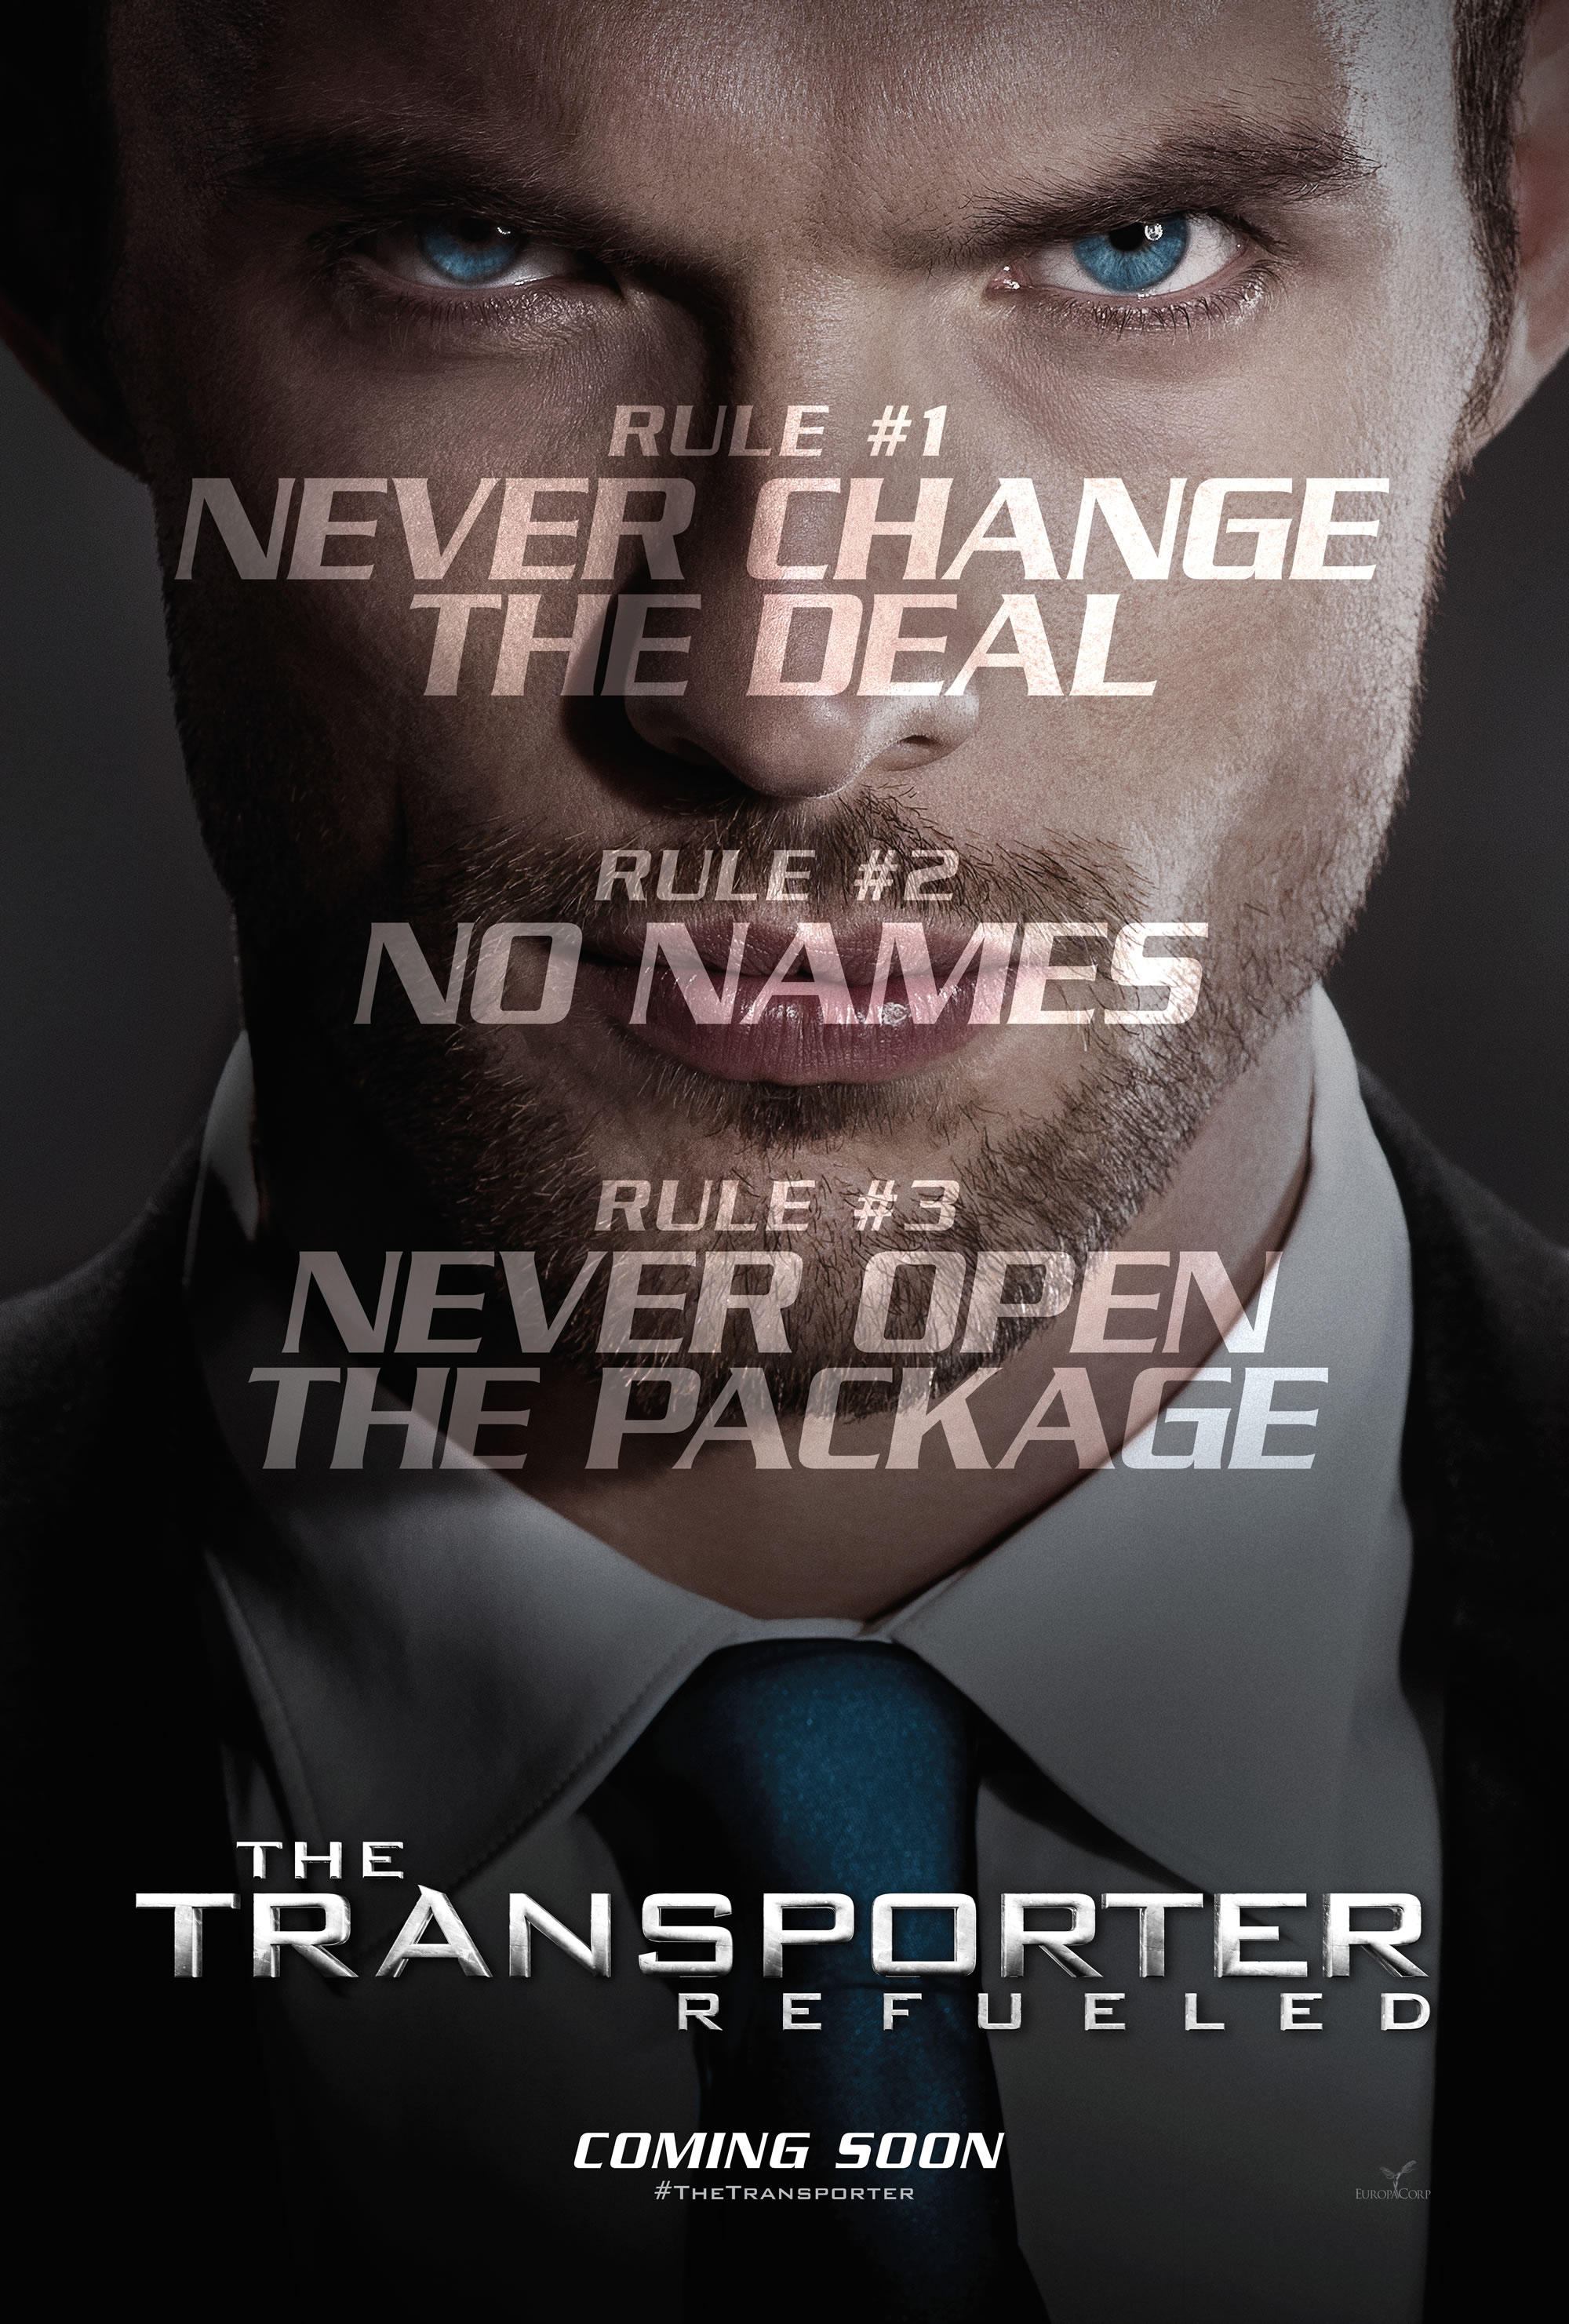 The Transporter Refueled #10